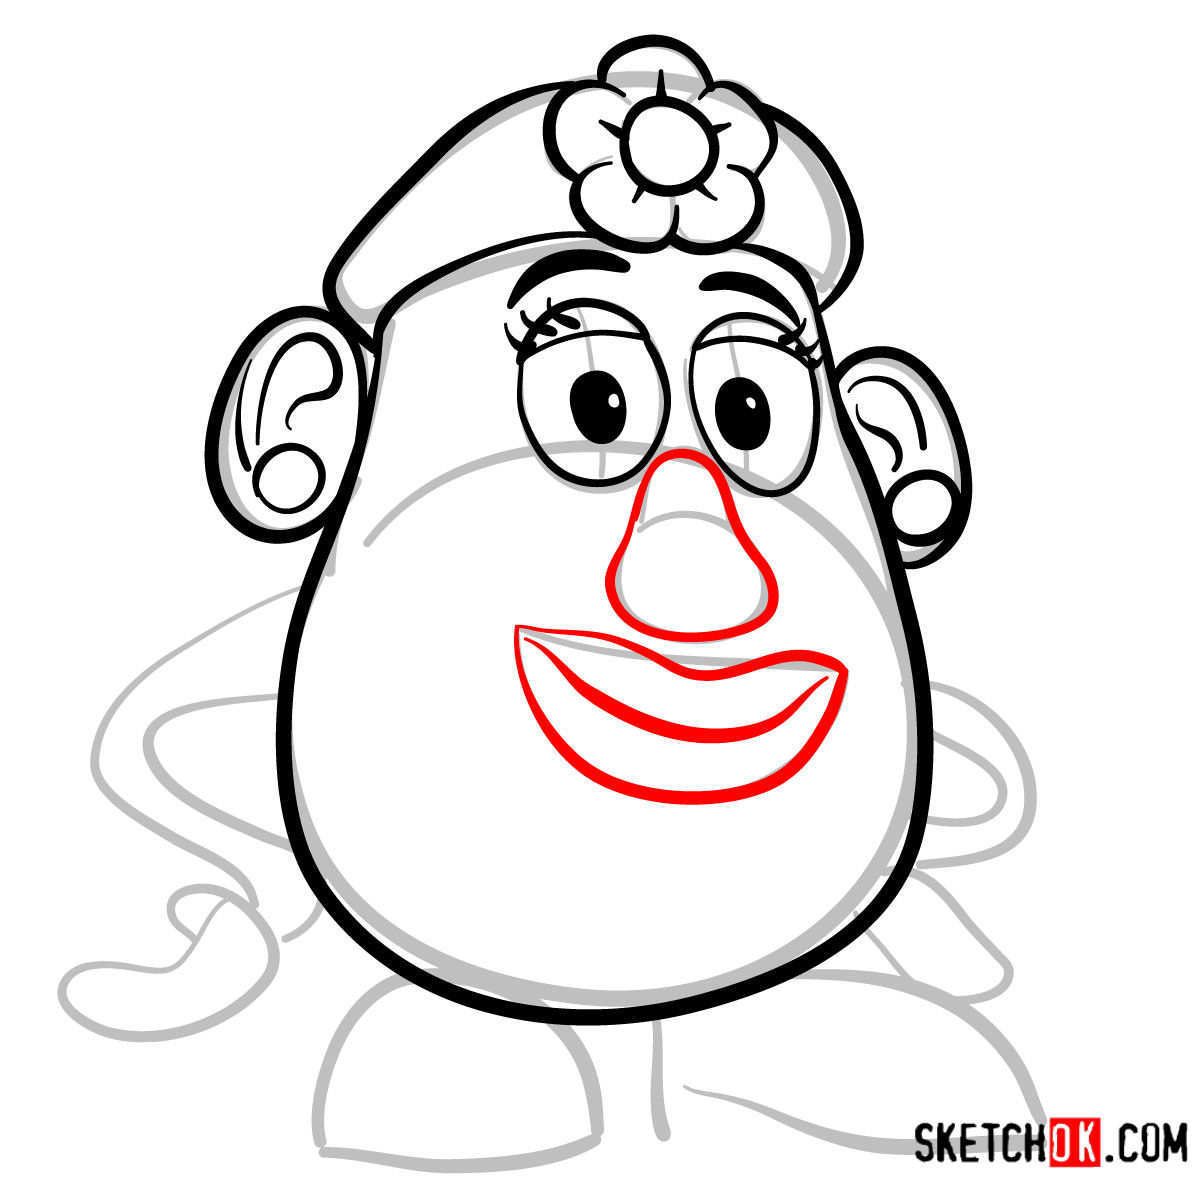 How to draw Mrs. Potato Head from Toy Story - step 06